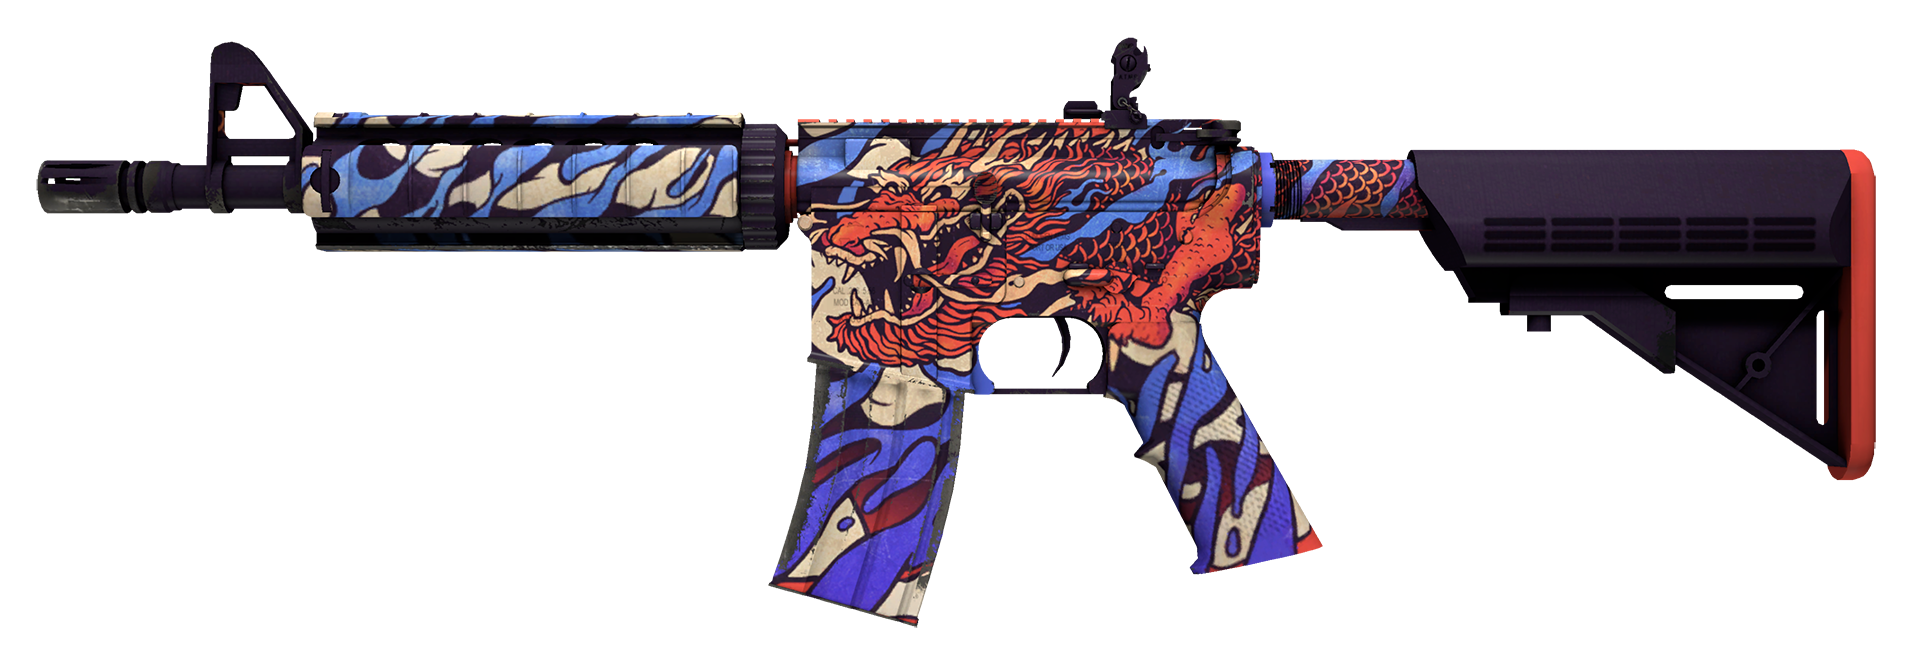 M4a4 asiimov battle scarred фото 56